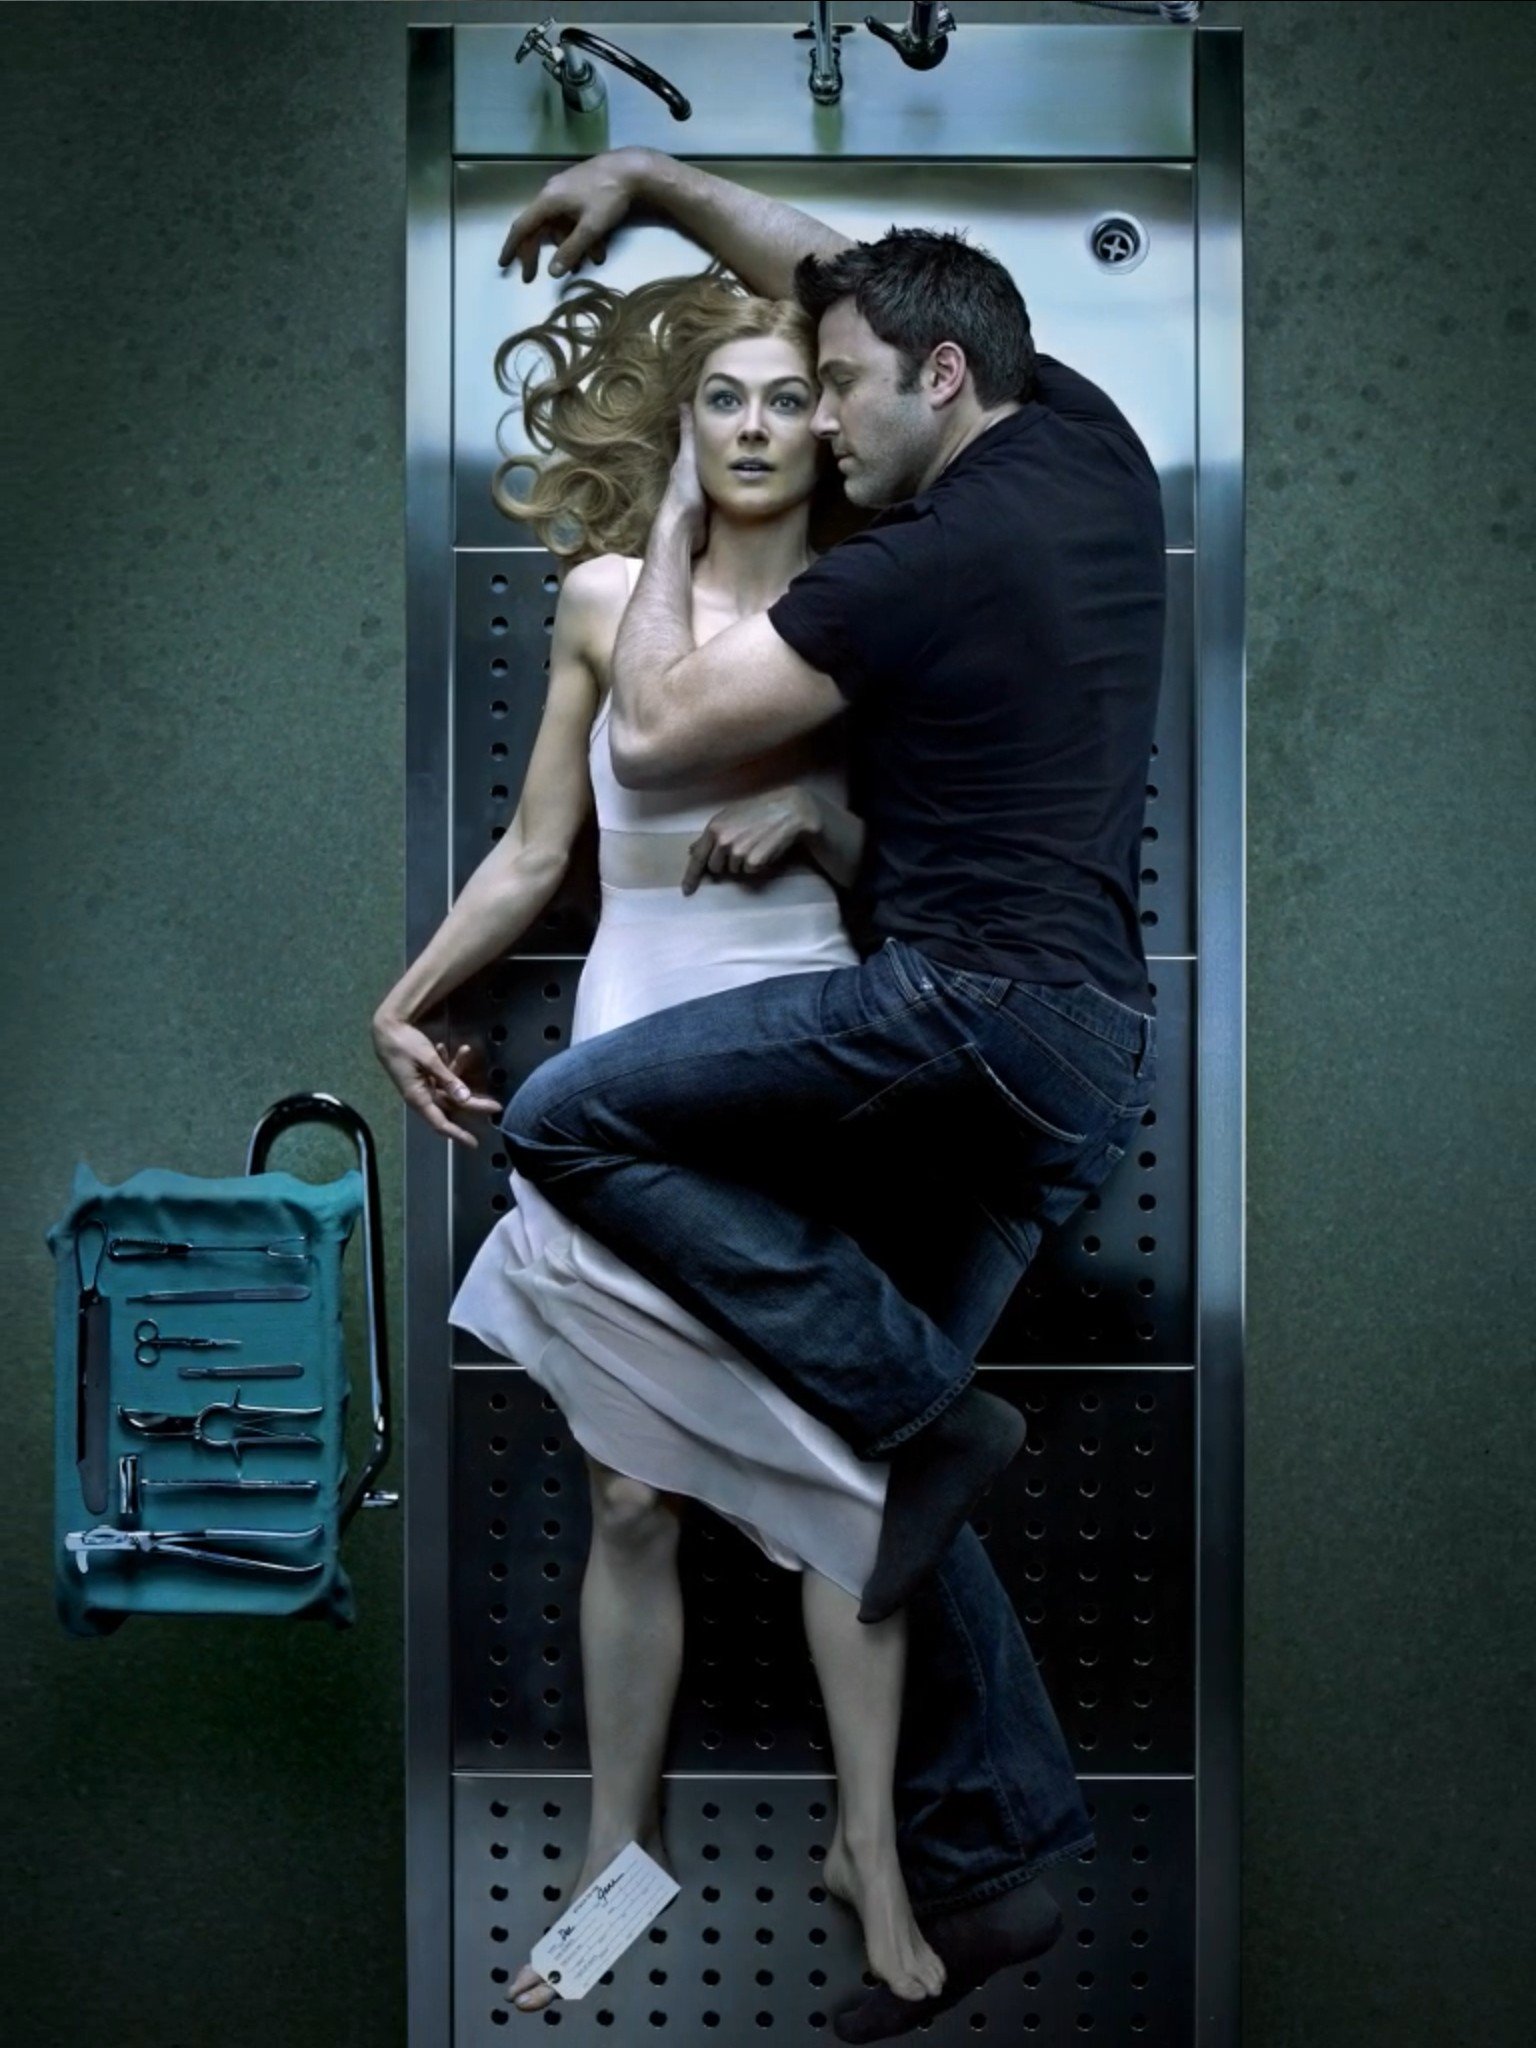 Ben Affleck and Rosamund Pike - Gone Girl Photoshoot for Entertainment Weekly - 2014